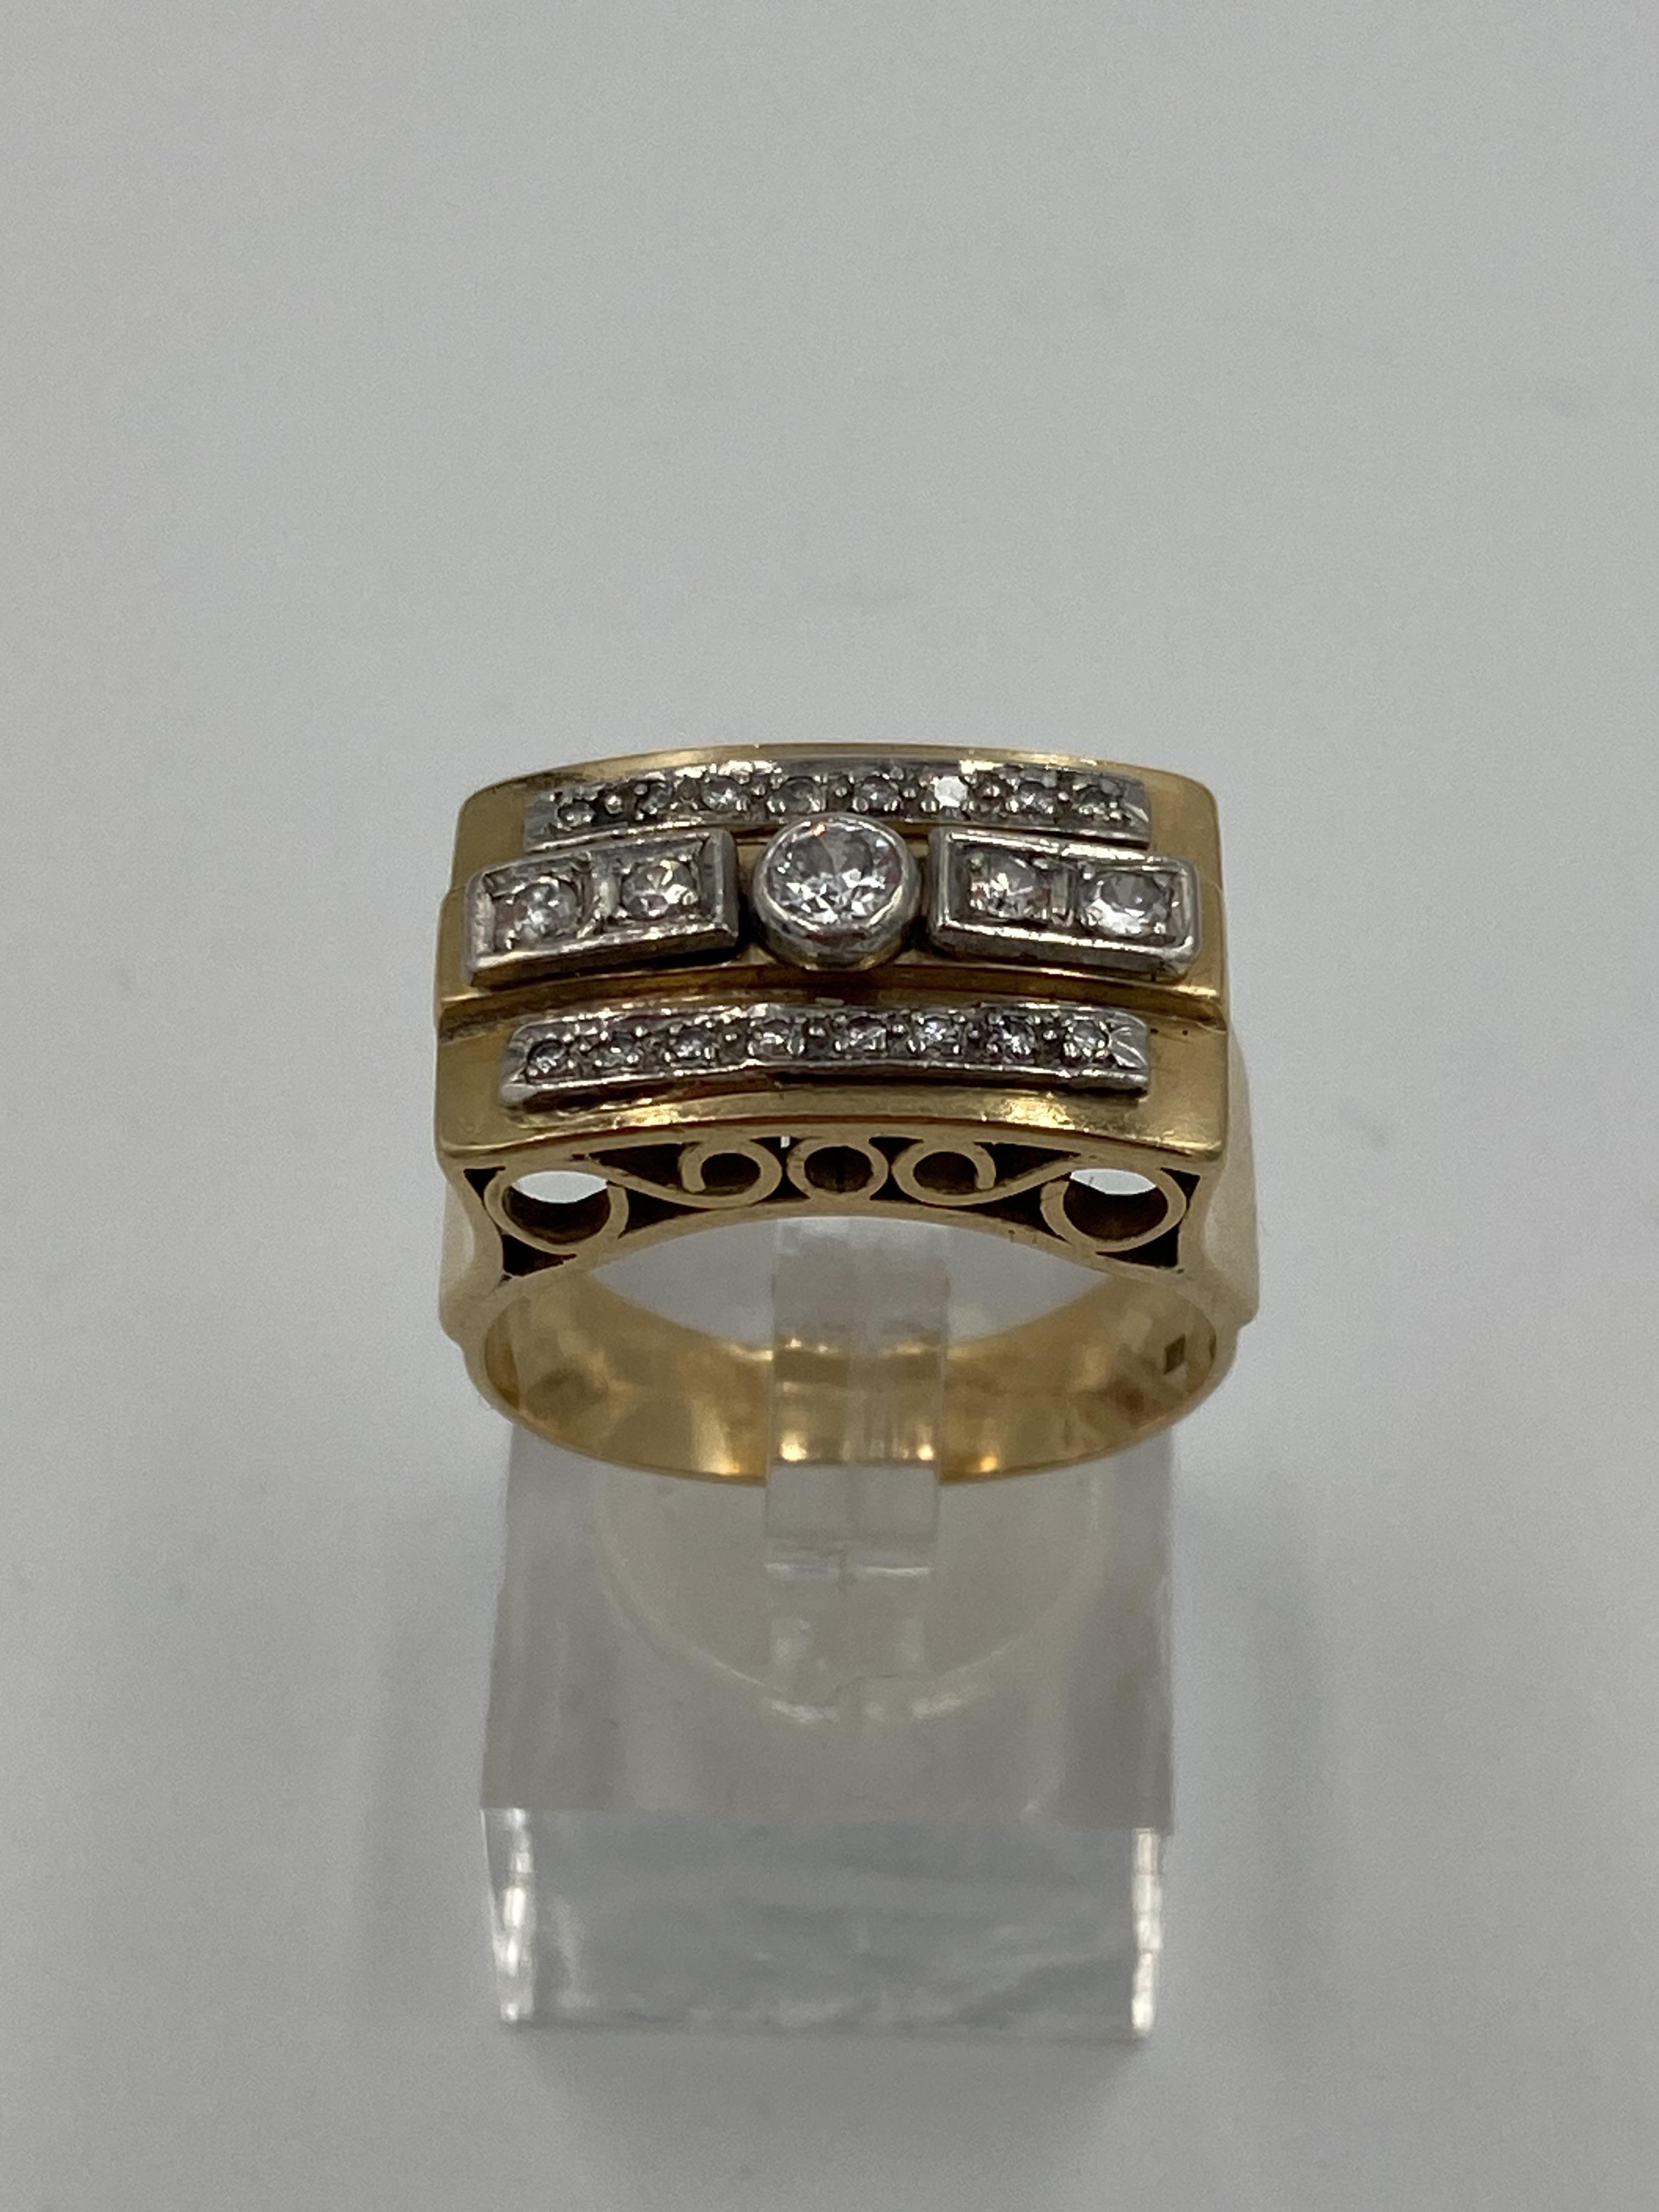 18ct gold and diamond ring - Image 2 of 4